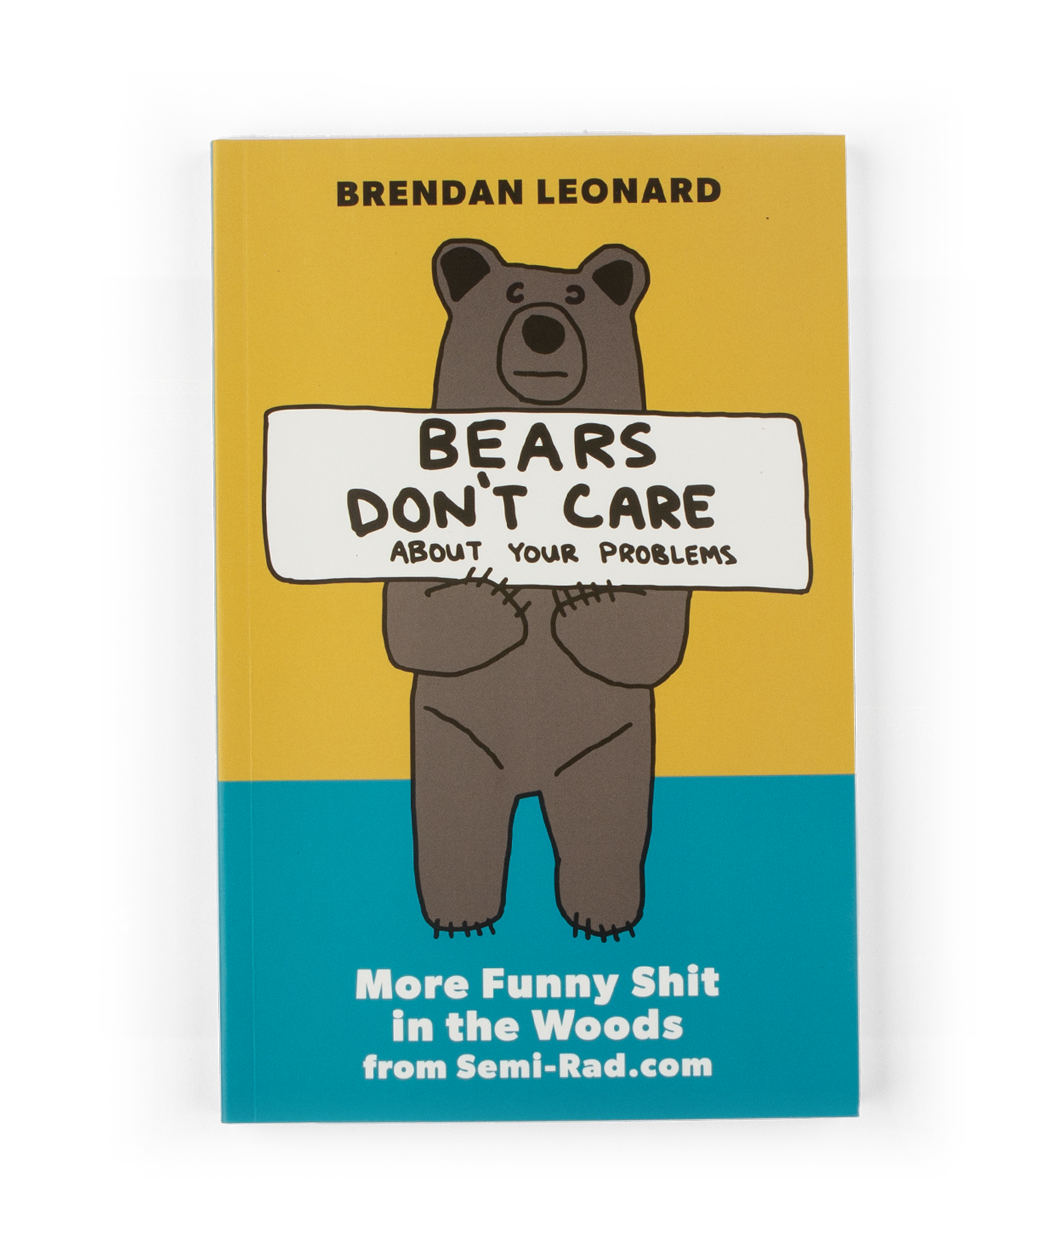 The cover of a book with a yellow and blue background with an an illustration of a bear standing up holding a sign that says 